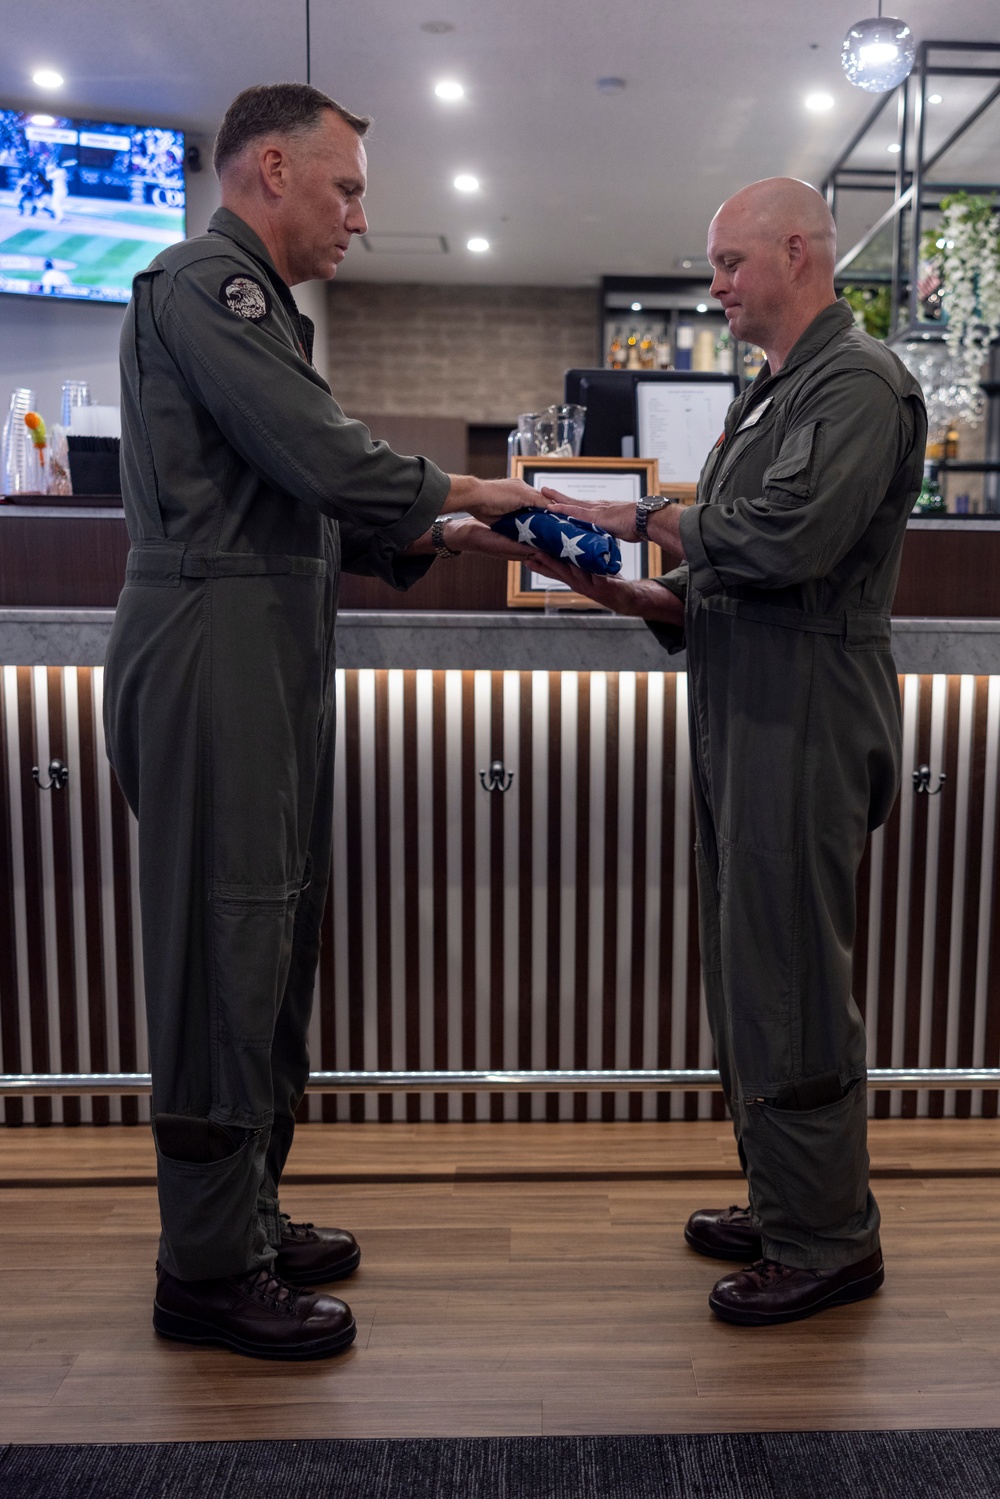 Col. Murray retires after 31 years of service